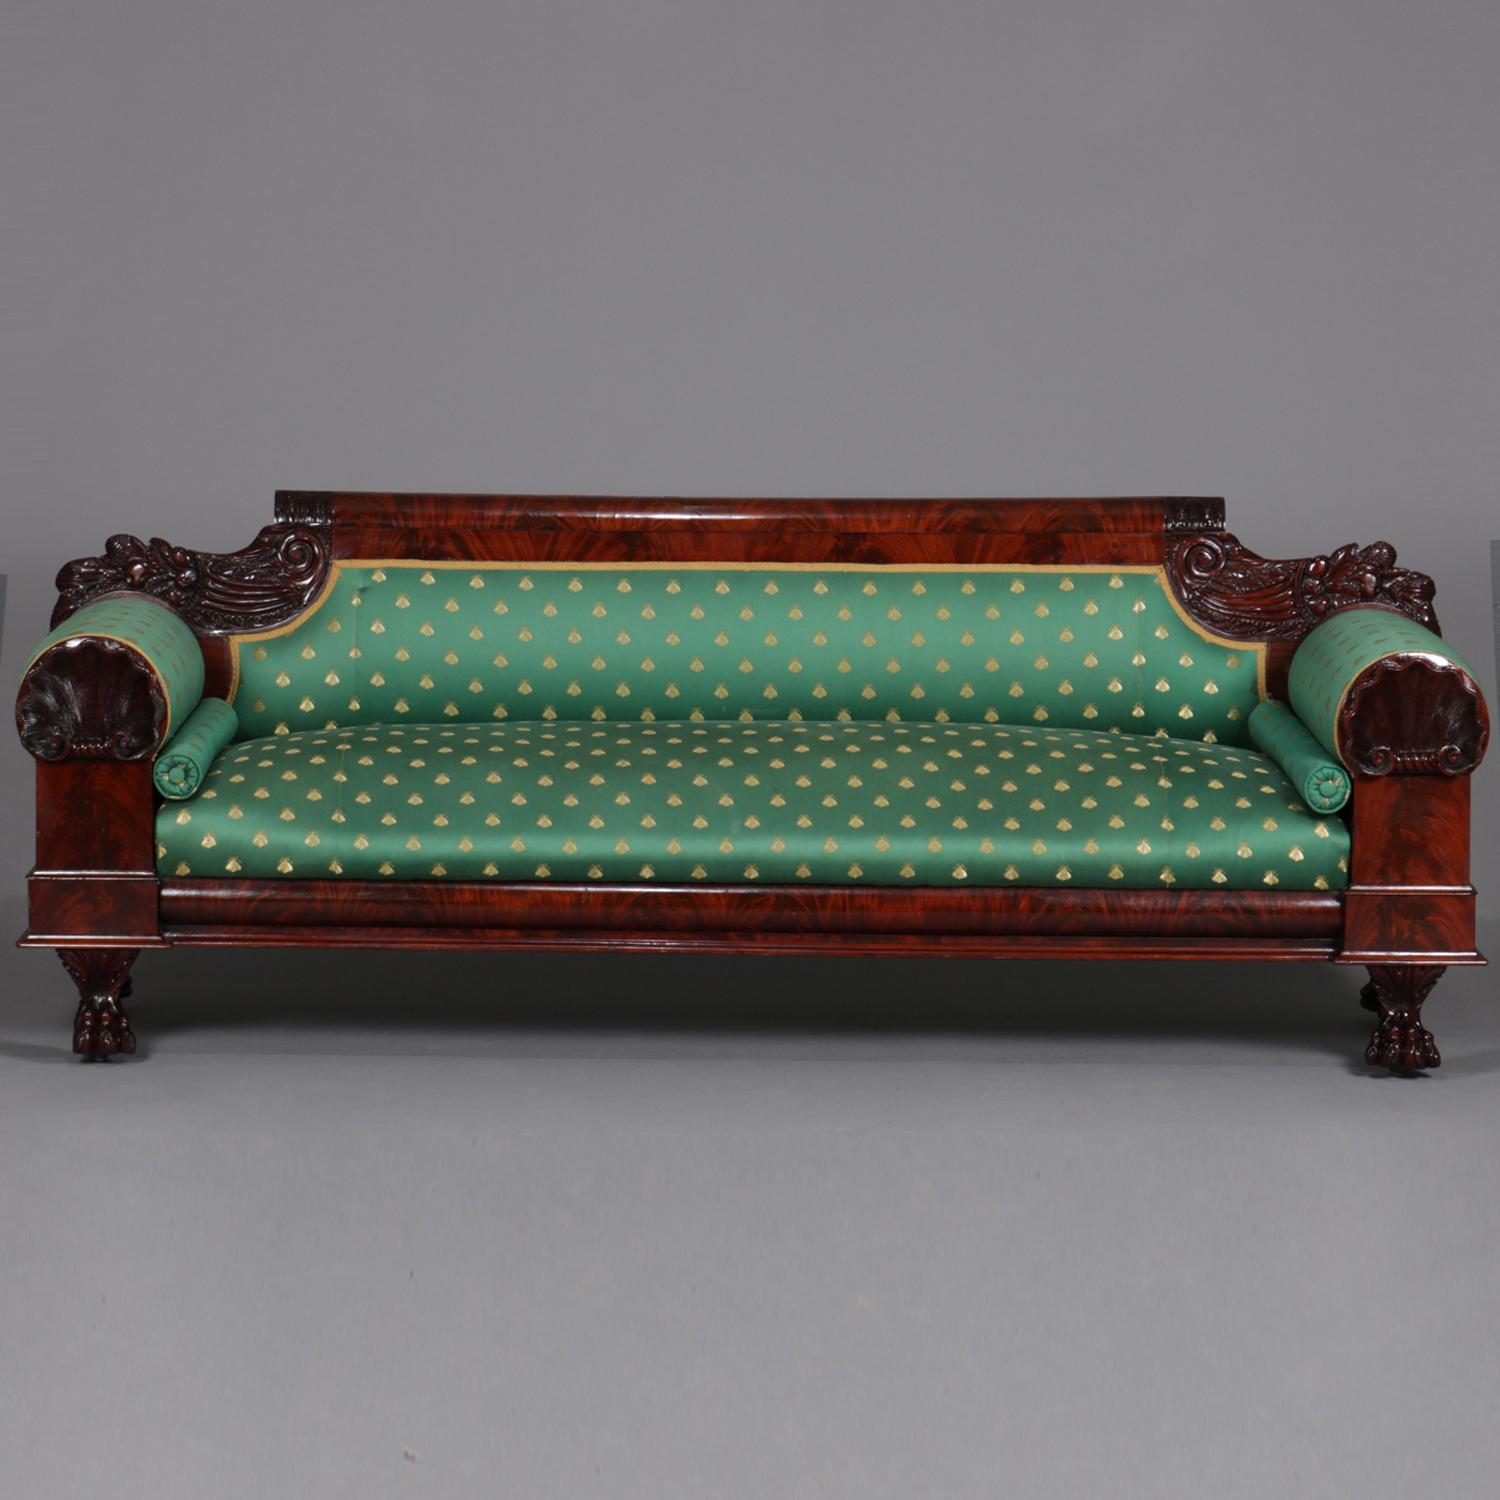 Classical American Empire sofa features flame mahogany frame with deeply striated back rail flanked by carved cornucopia, oversized rolled arms with carved shell surmounting column-form supports raised on lion paw feet and with deeply striated ogee